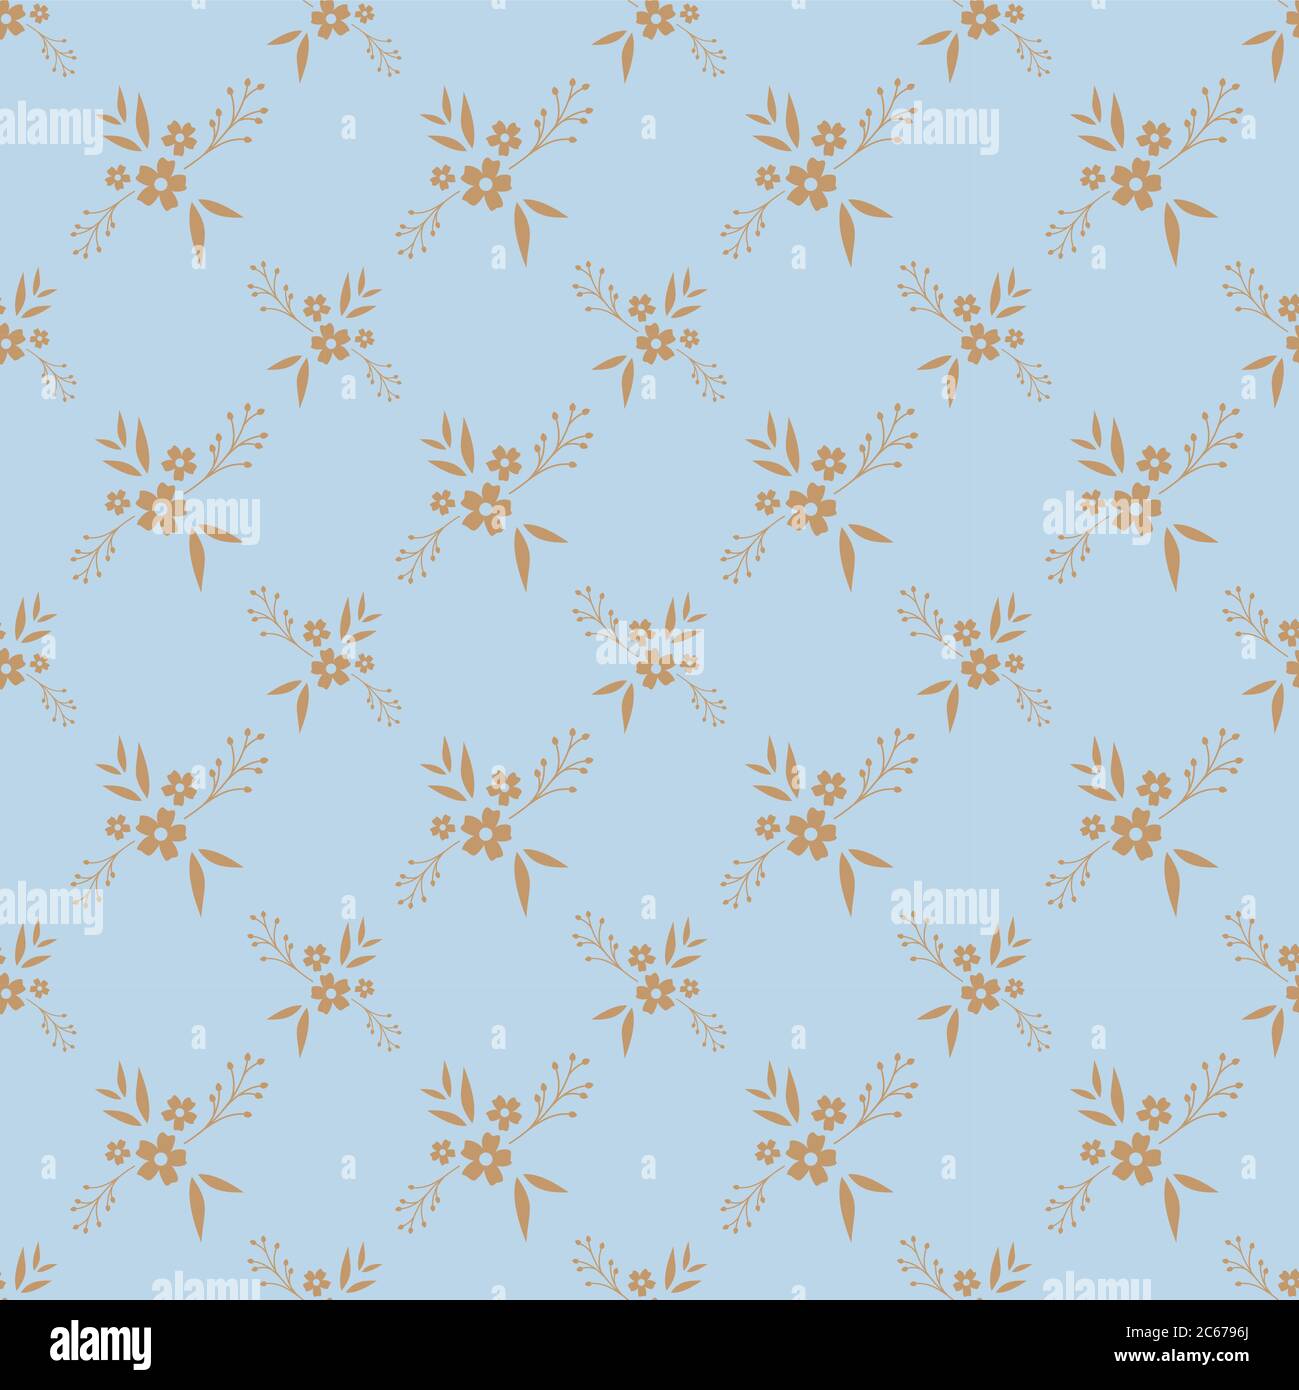 Floral seamless pattern design. Brown flowers on blue background, diamond shape vintage pattern for wallpapers, print and fabric. Stock Vector